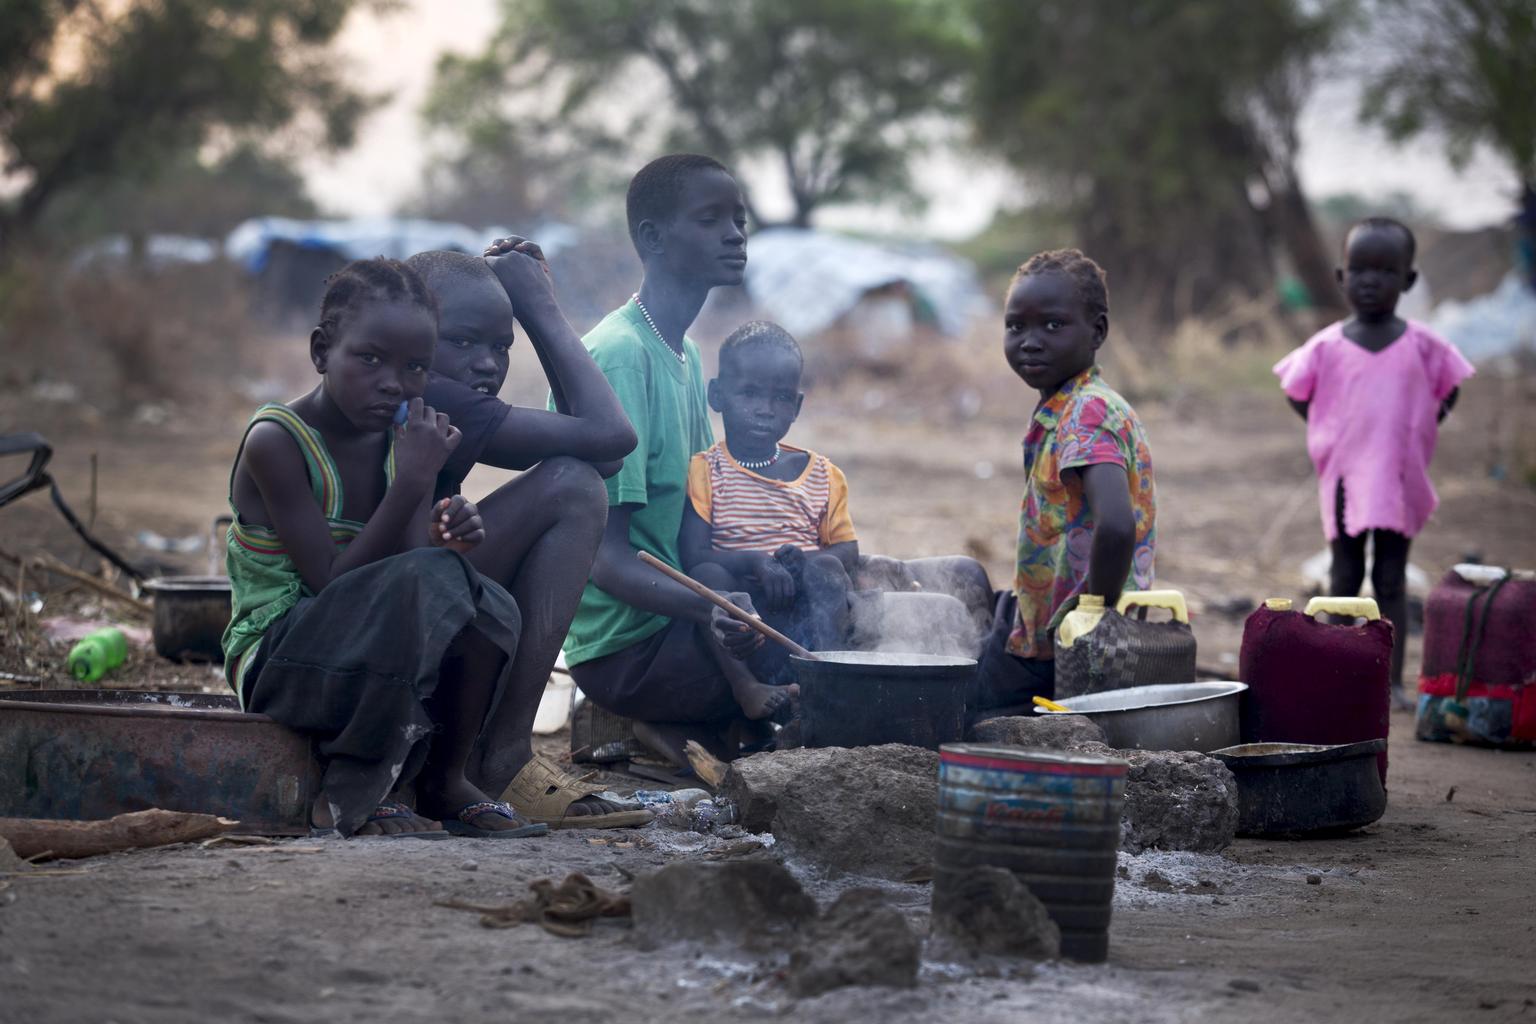 Displaced children gather at a cooking fire in the town of Mingkaman, South Sudan.